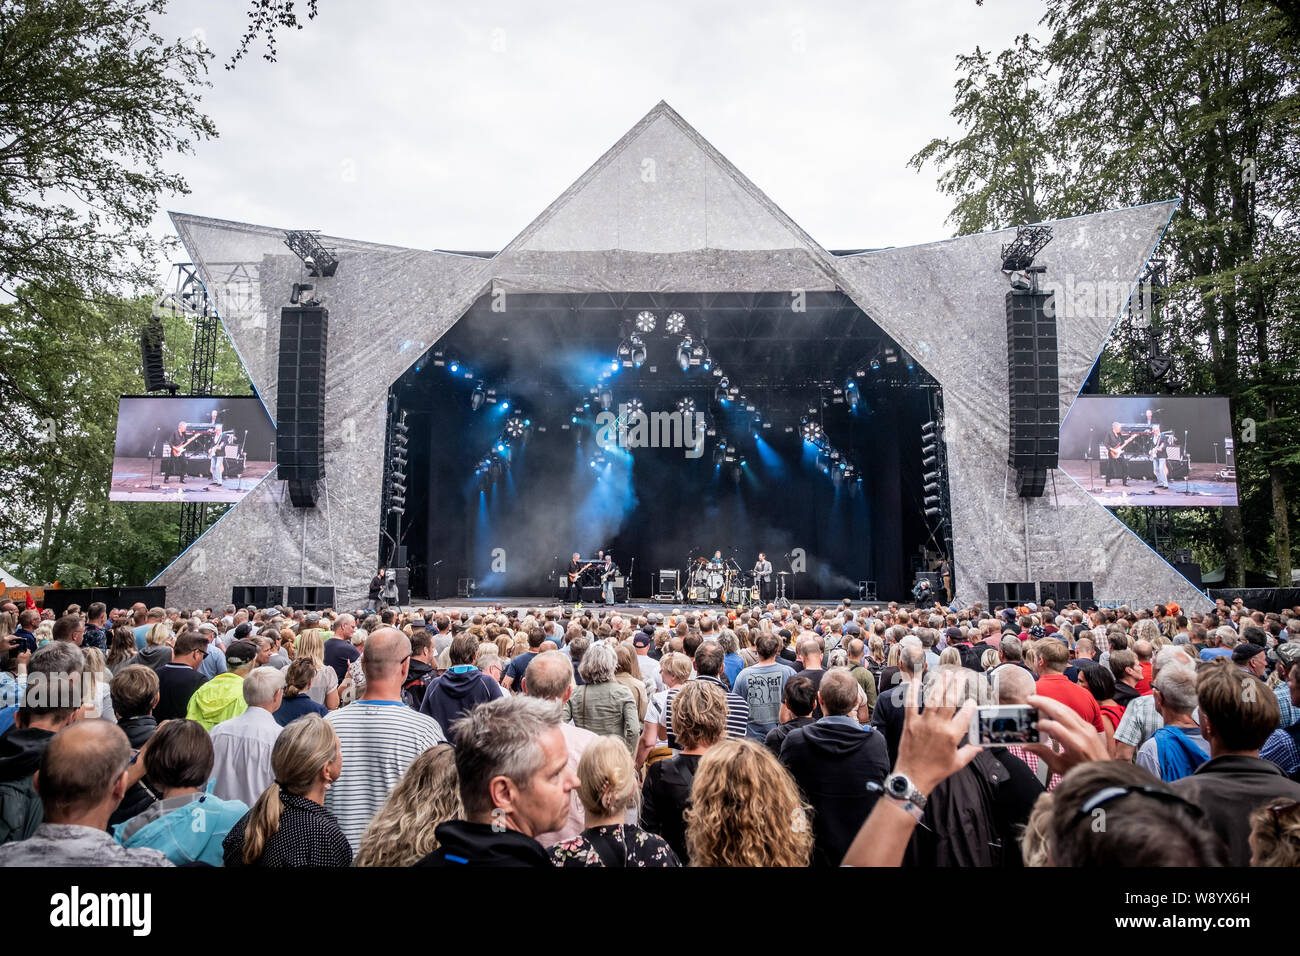 Skanderborg, 09th, August 2019. The English band 10cc performs a live concert during the Danish music festival SmukFest in (Photo credit: Gonzales - Kim M. Leland Stock Photo - Alamy